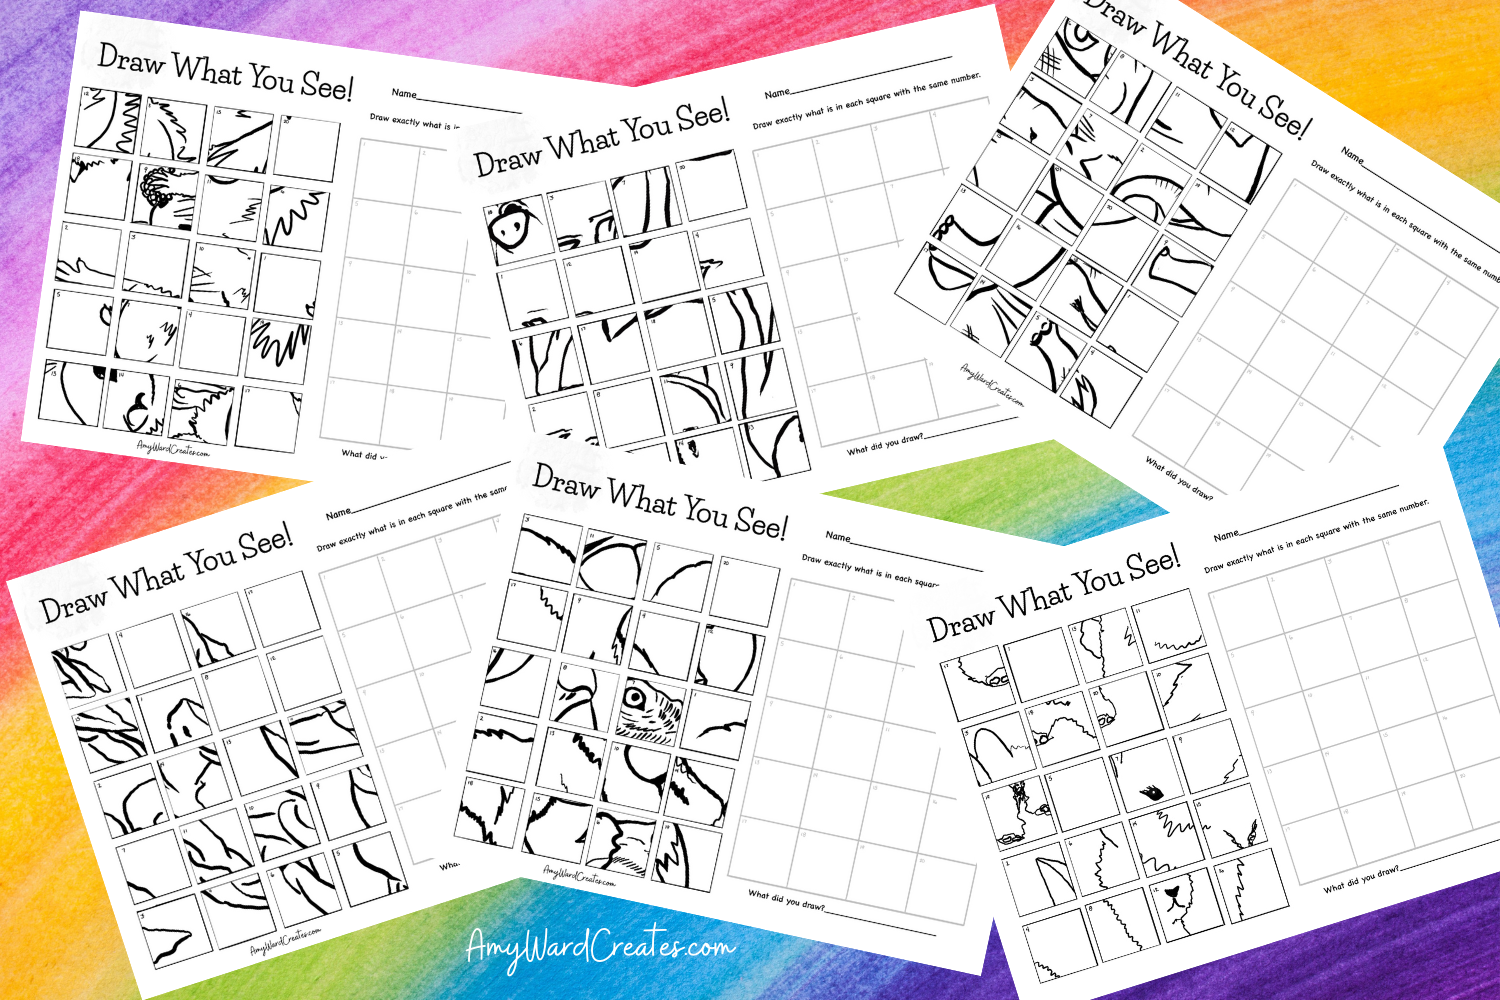 The Helpful Art Teacher: How to create and use a drawing grid